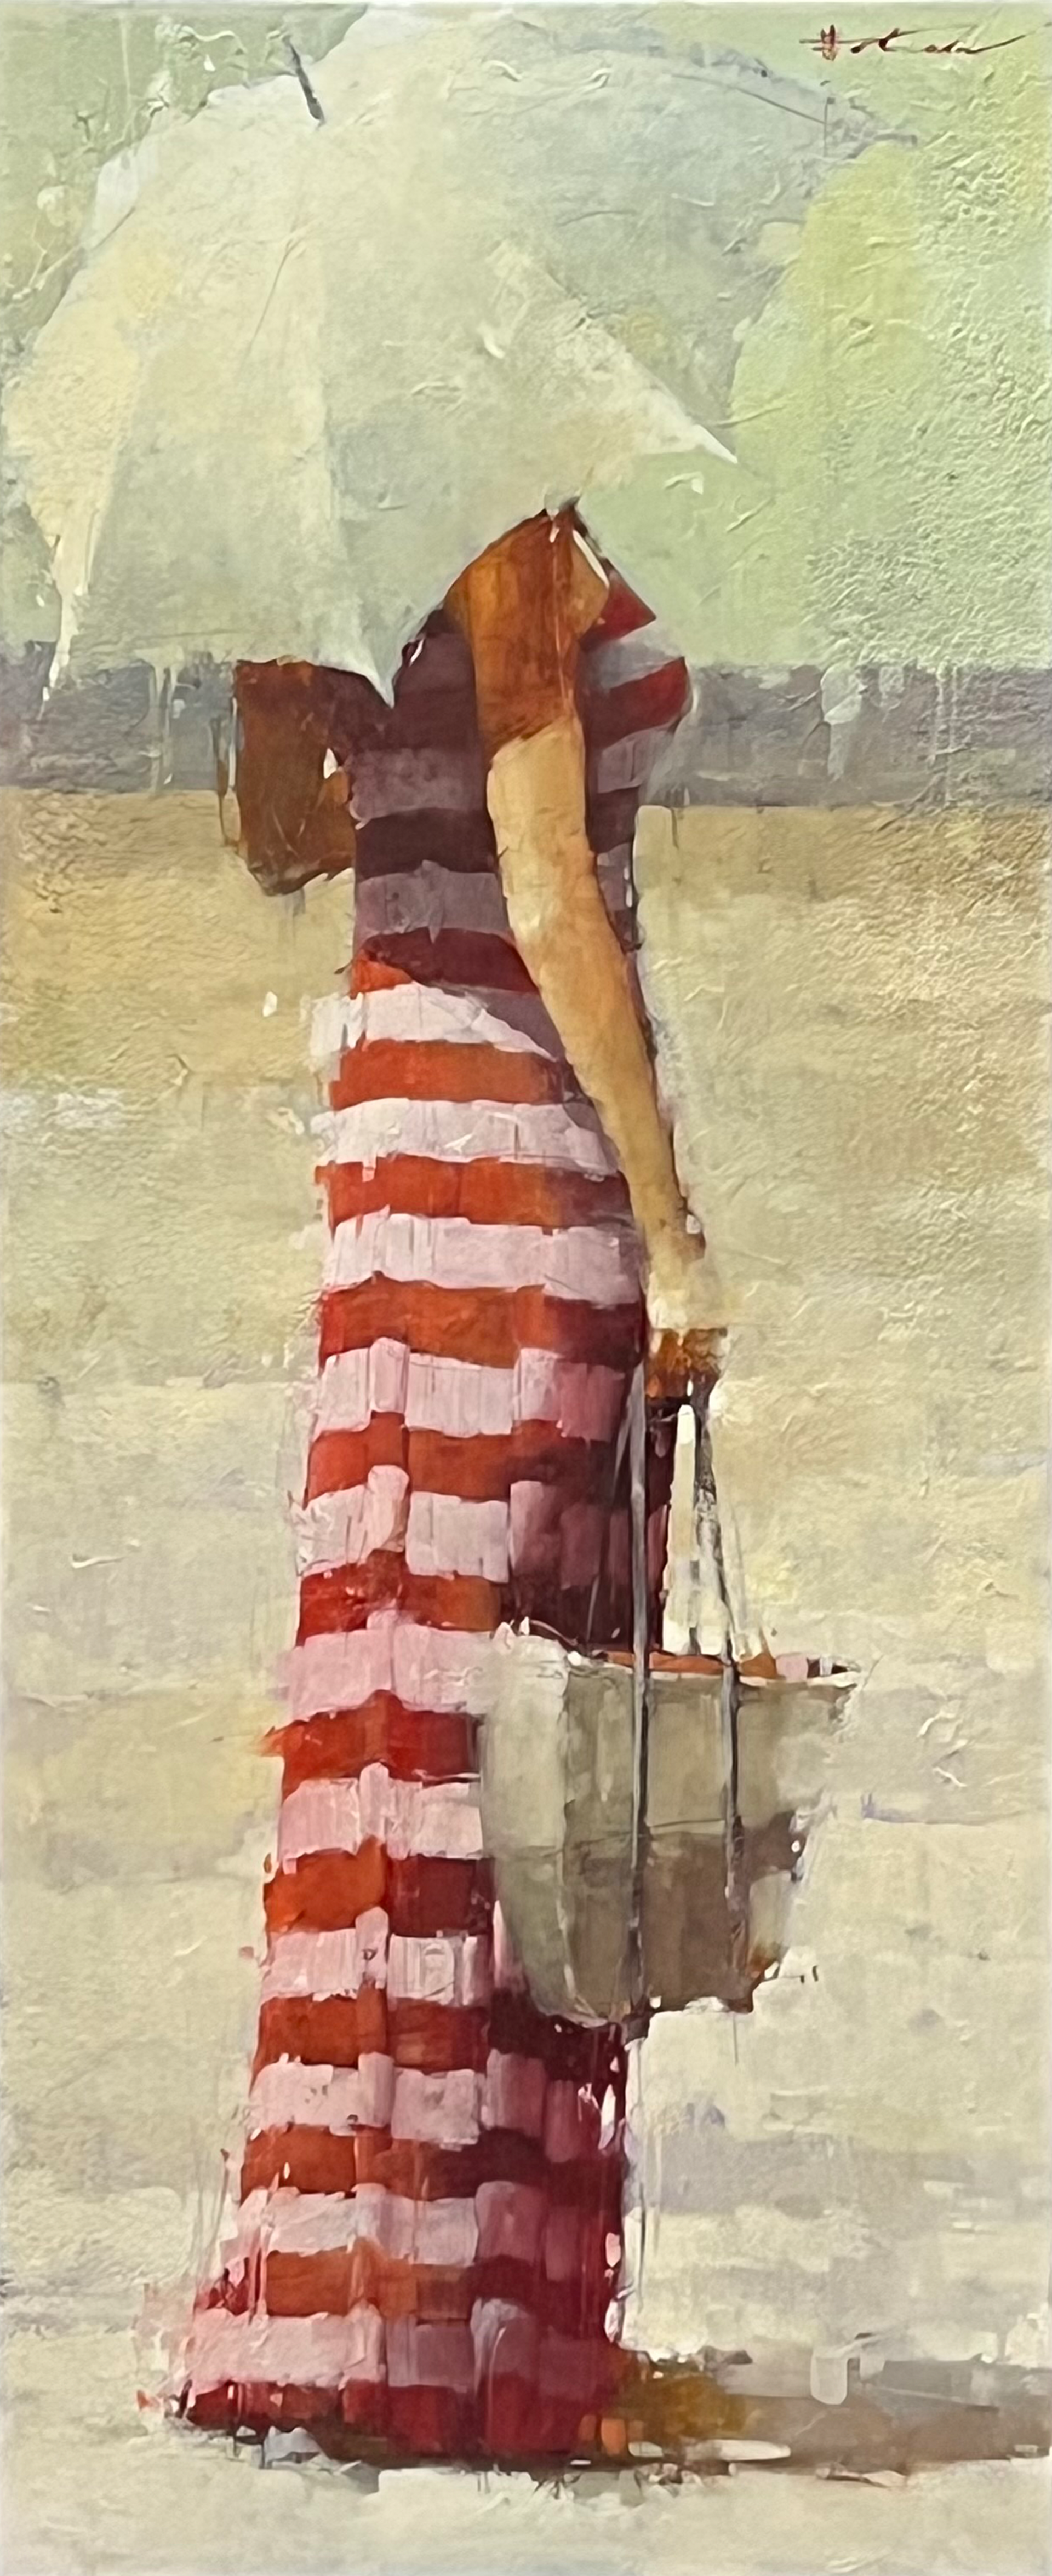 "The Day Off" Series #24 by Andre Kohn